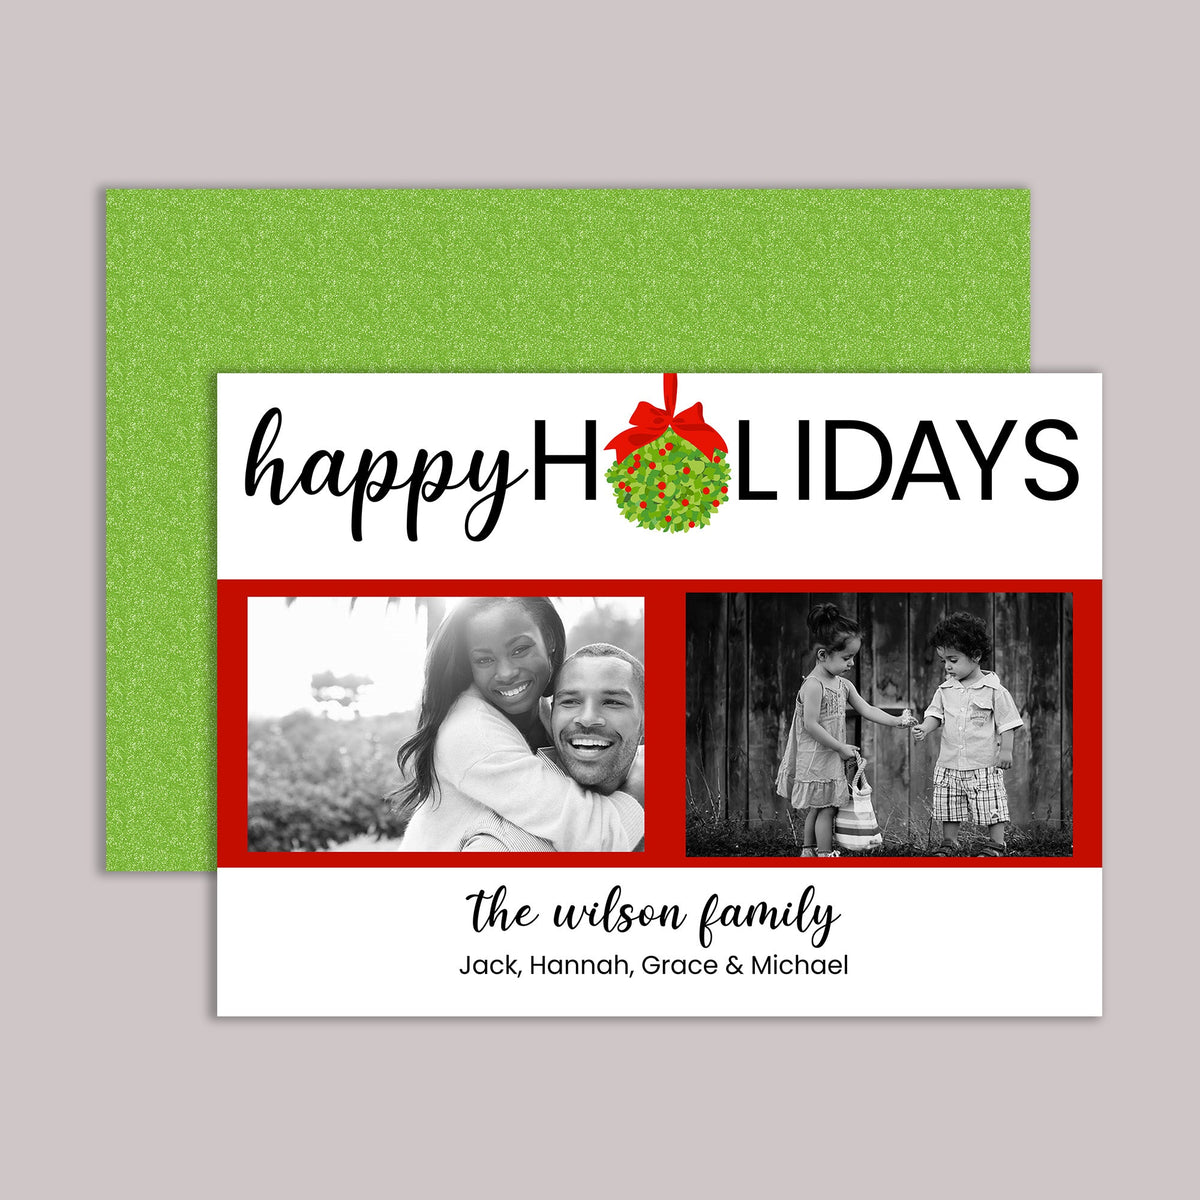 Hanging Christmas Holly - Personalized Photo Card - The Note House